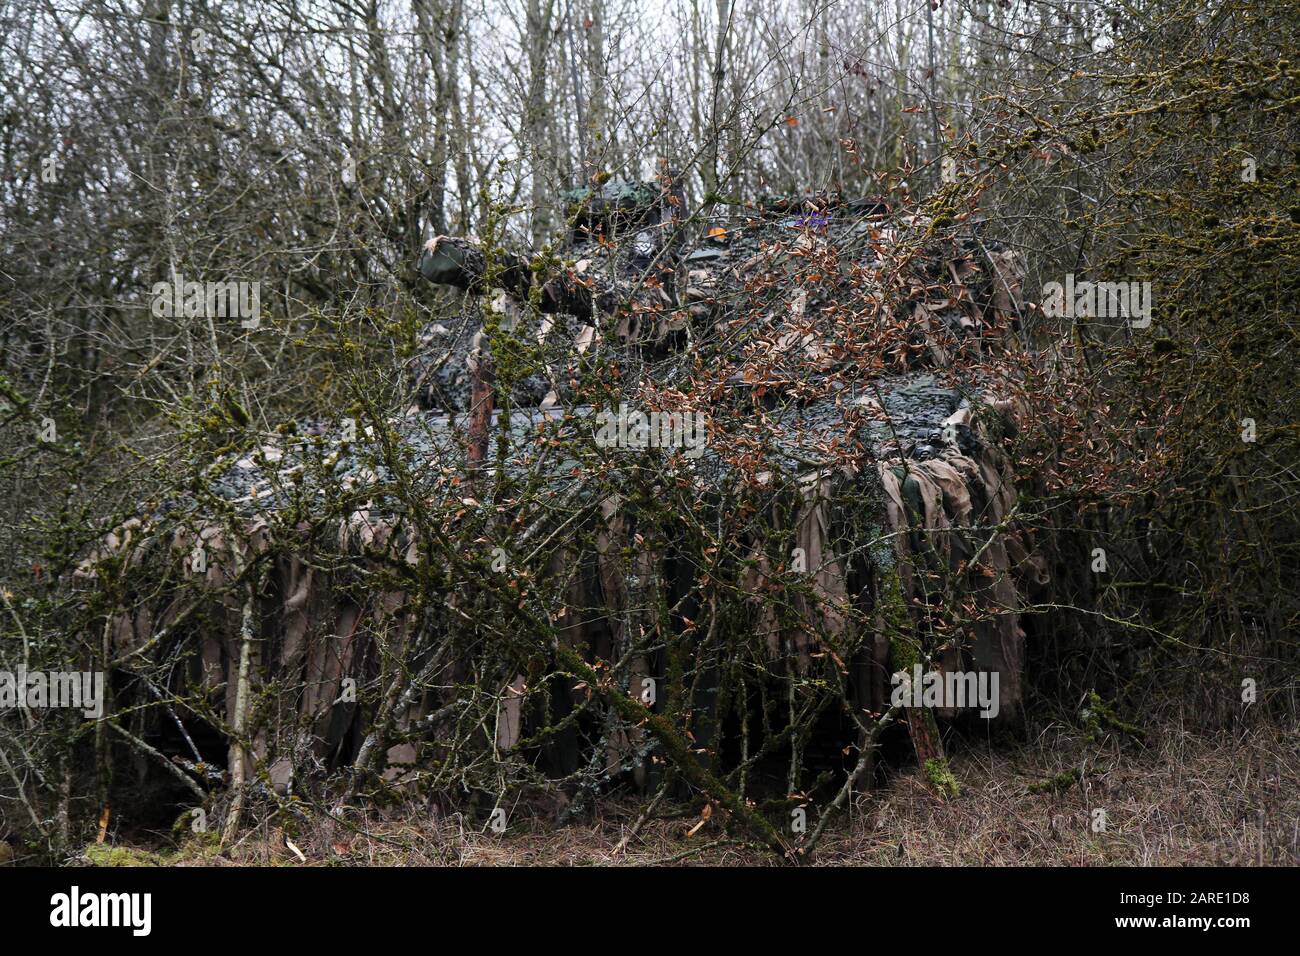 A Dutch tank observes the battlefield from a concealed position during Combined Resolve XIII at The Joint Multinational Readiness Center in Hohenfels, Germany on January 24, 2020. At this training, allied and partner troops practice battle scenarios to hone their skills in a real-world training environment. Stock Photo